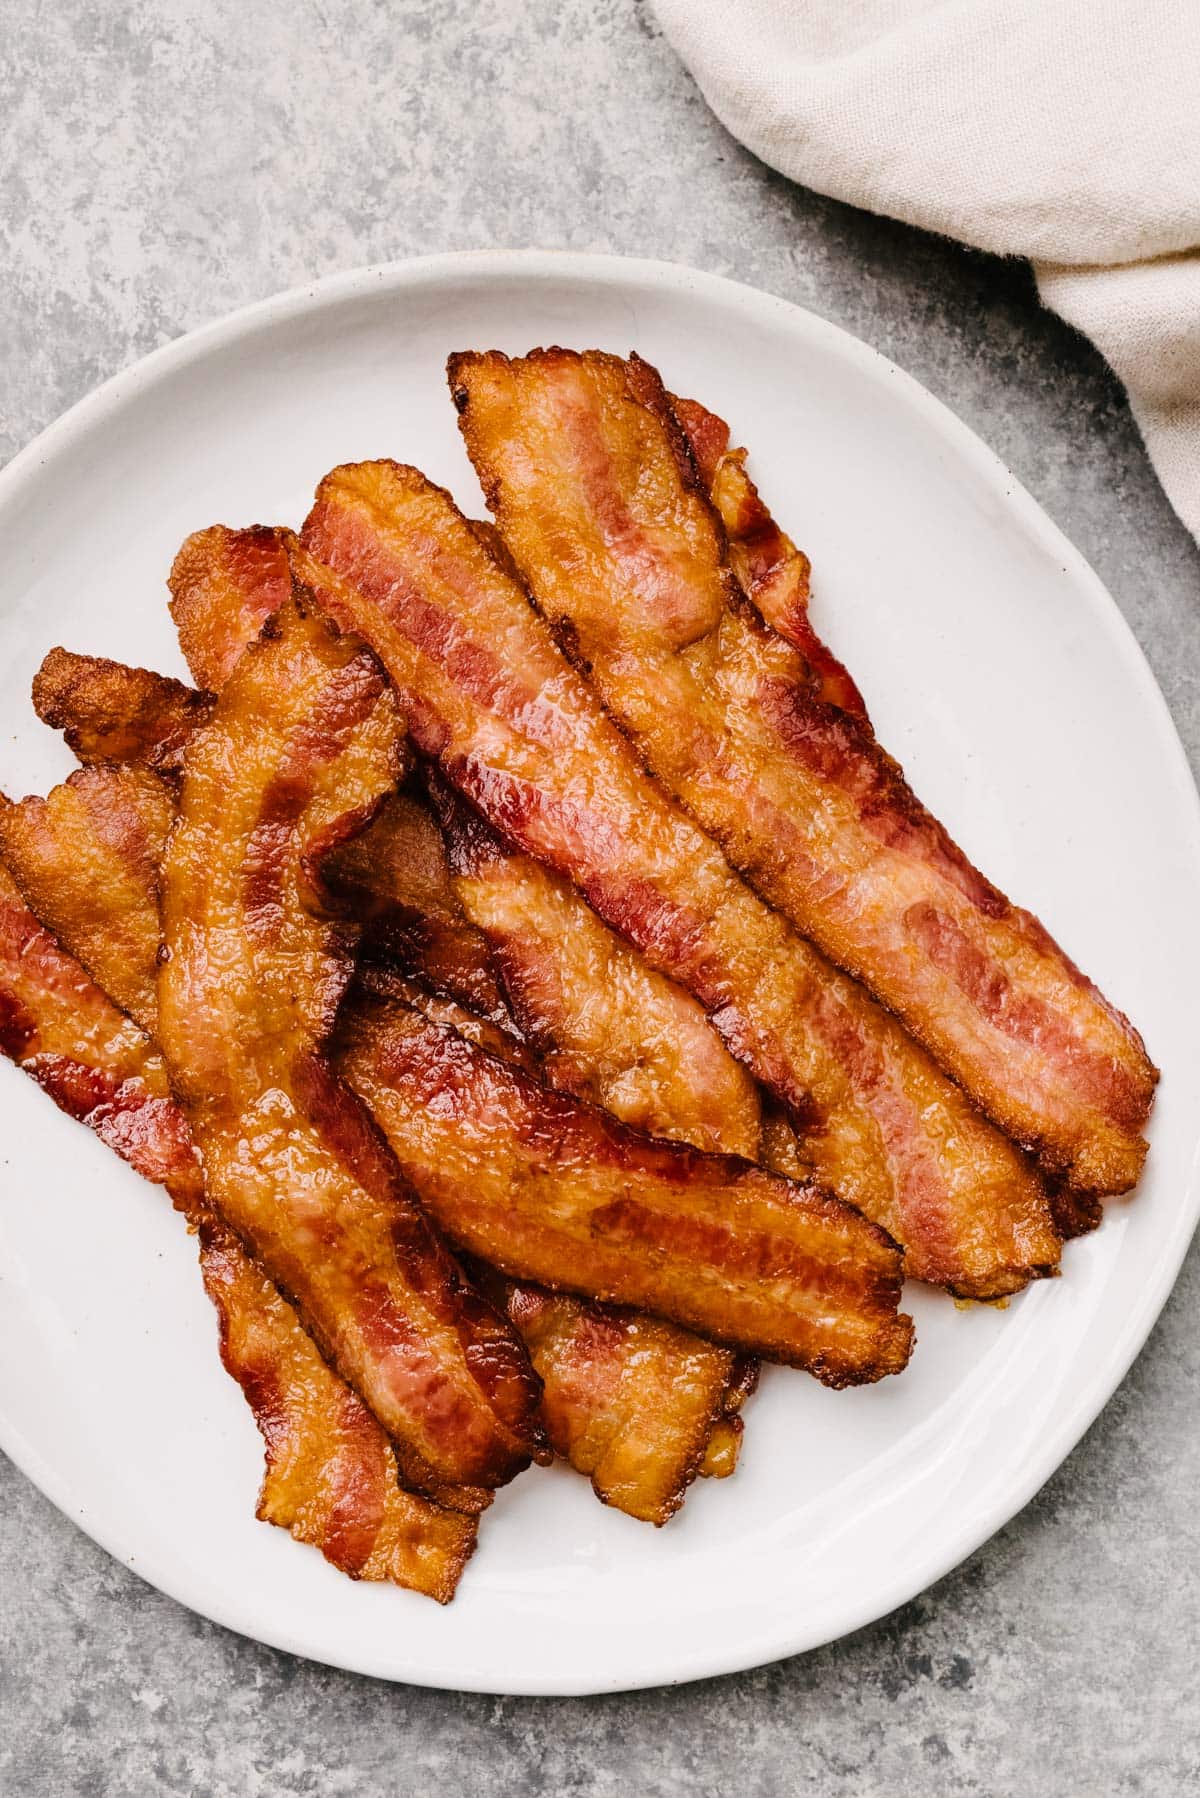 Oven cooked bacon strips on a white plate with tan linen napkin to the side.